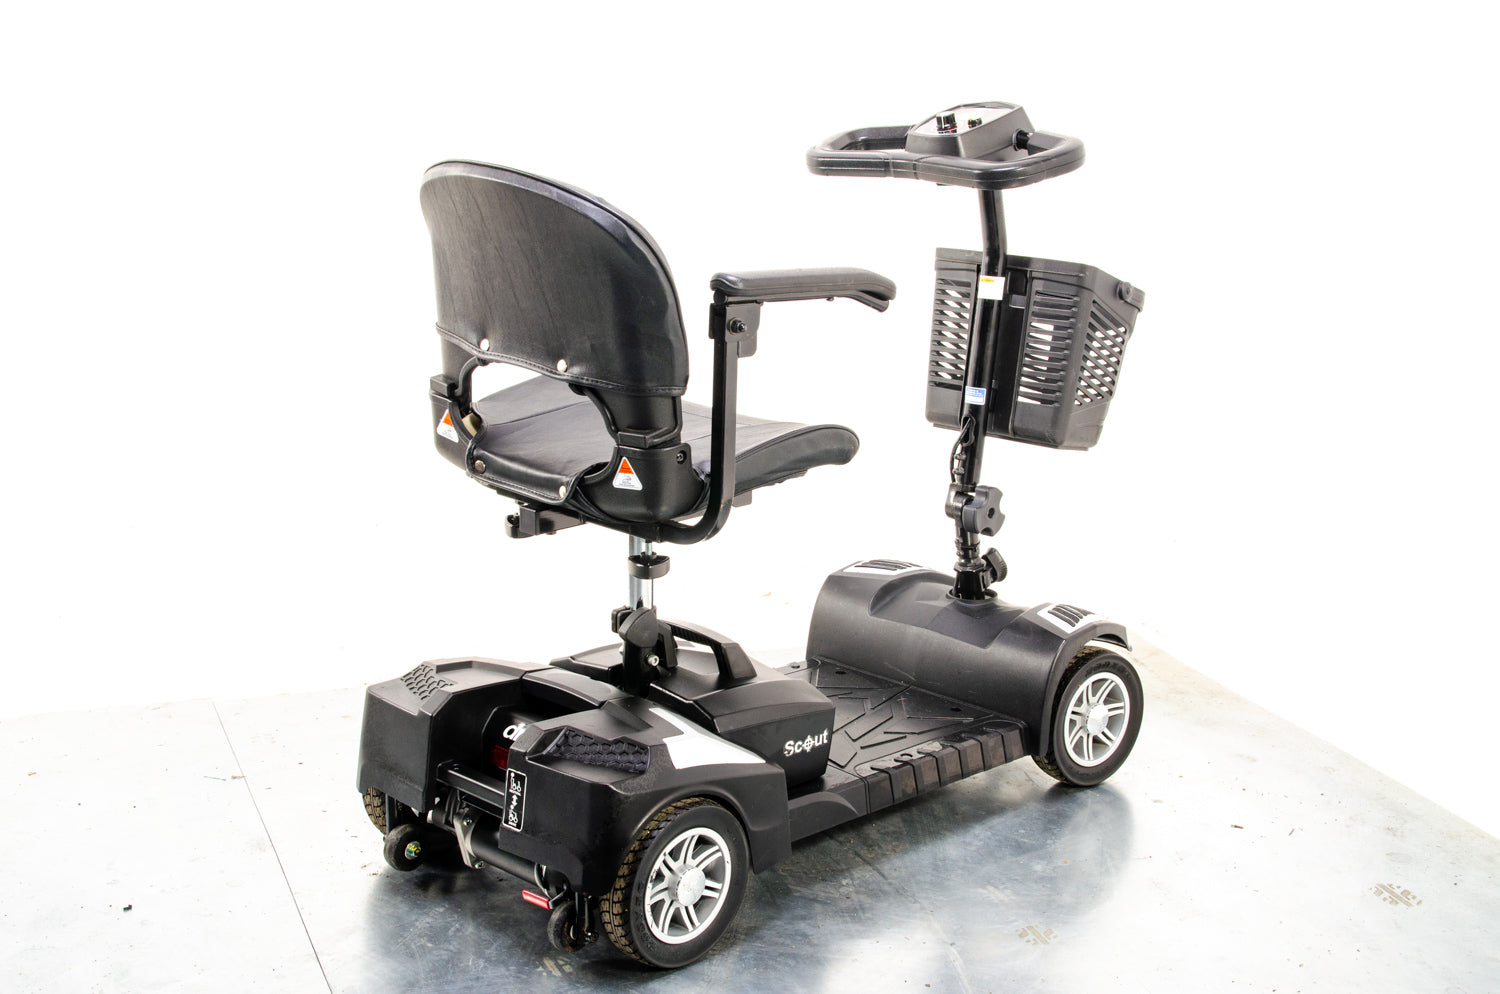 Drive Scout Used Mobility Scooter Transportable Lightweight Travel Boot Pavement Portable